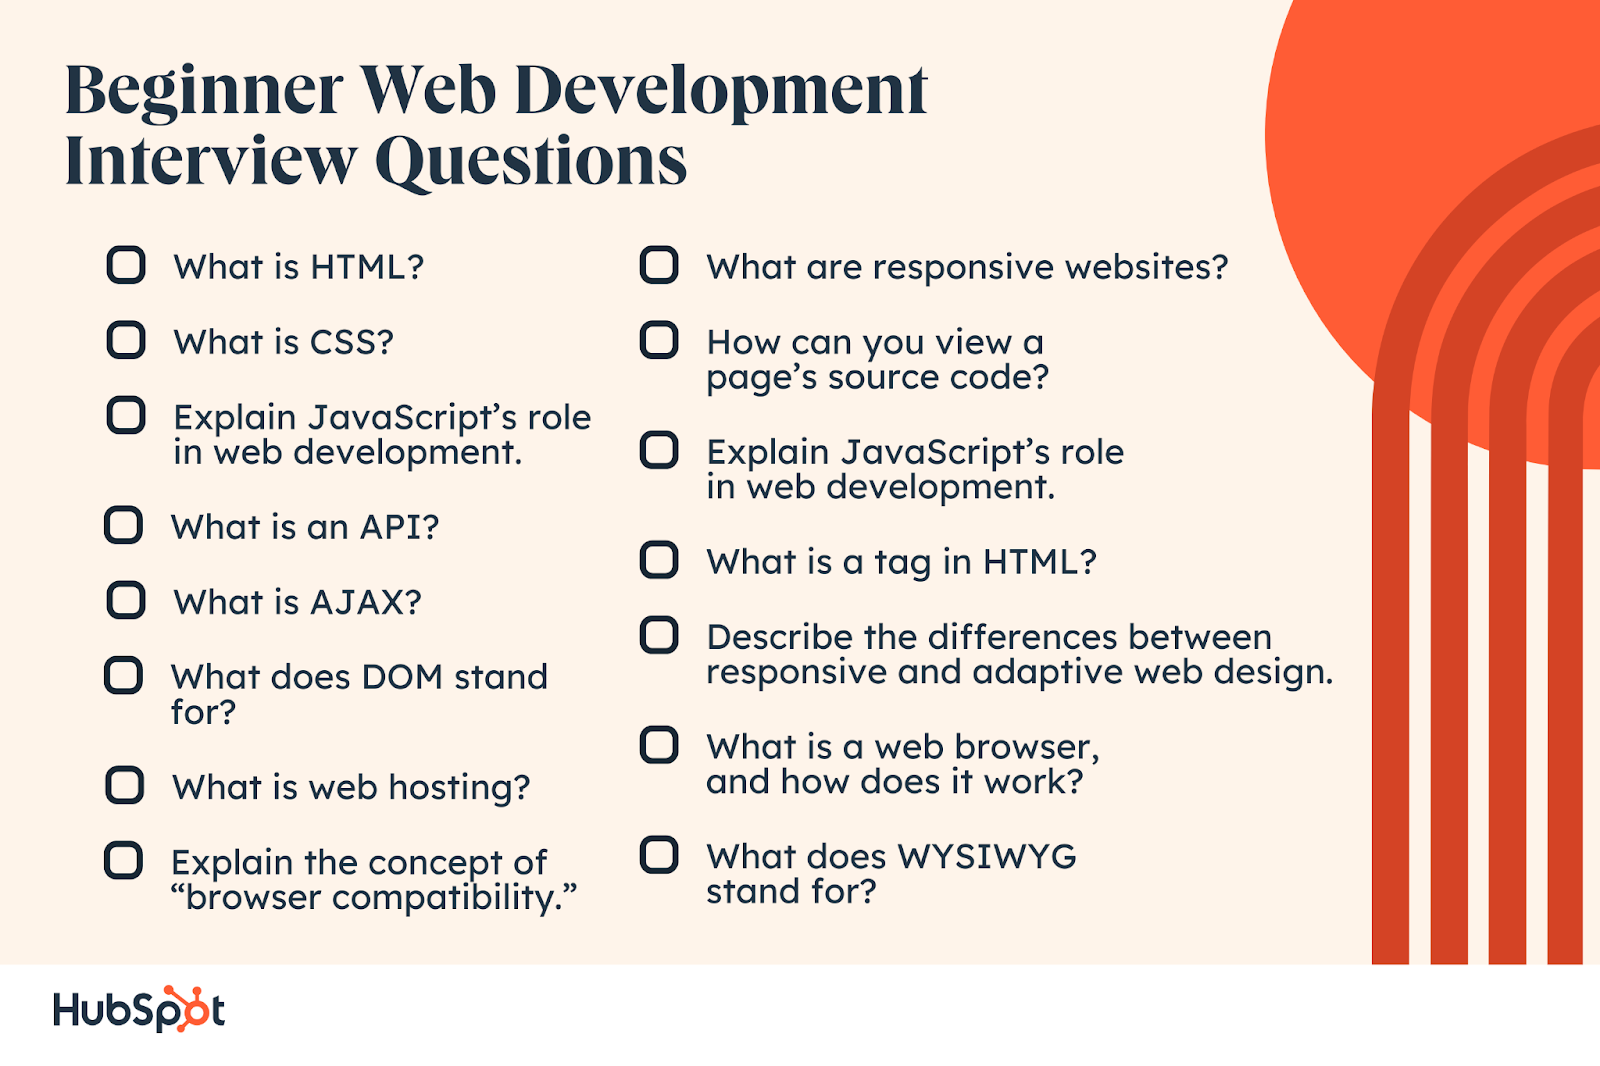 Beginner Web Development Interview Questions. What is HTML? What is CSS? What is an API? What is AJAX? What does DOM stand for? Explain JavaScript’s role  in web development. What is web hosting? Explain the concept of “browser compatibility.” What are responsive websites? How can you view a page’s source code? What is a tag in HTML? Describe the differences between responsive and adaptive web design. What is a web browser, and how does it work? Explain JavaScript’s role  in web development. What does WYSIWYG stand for?